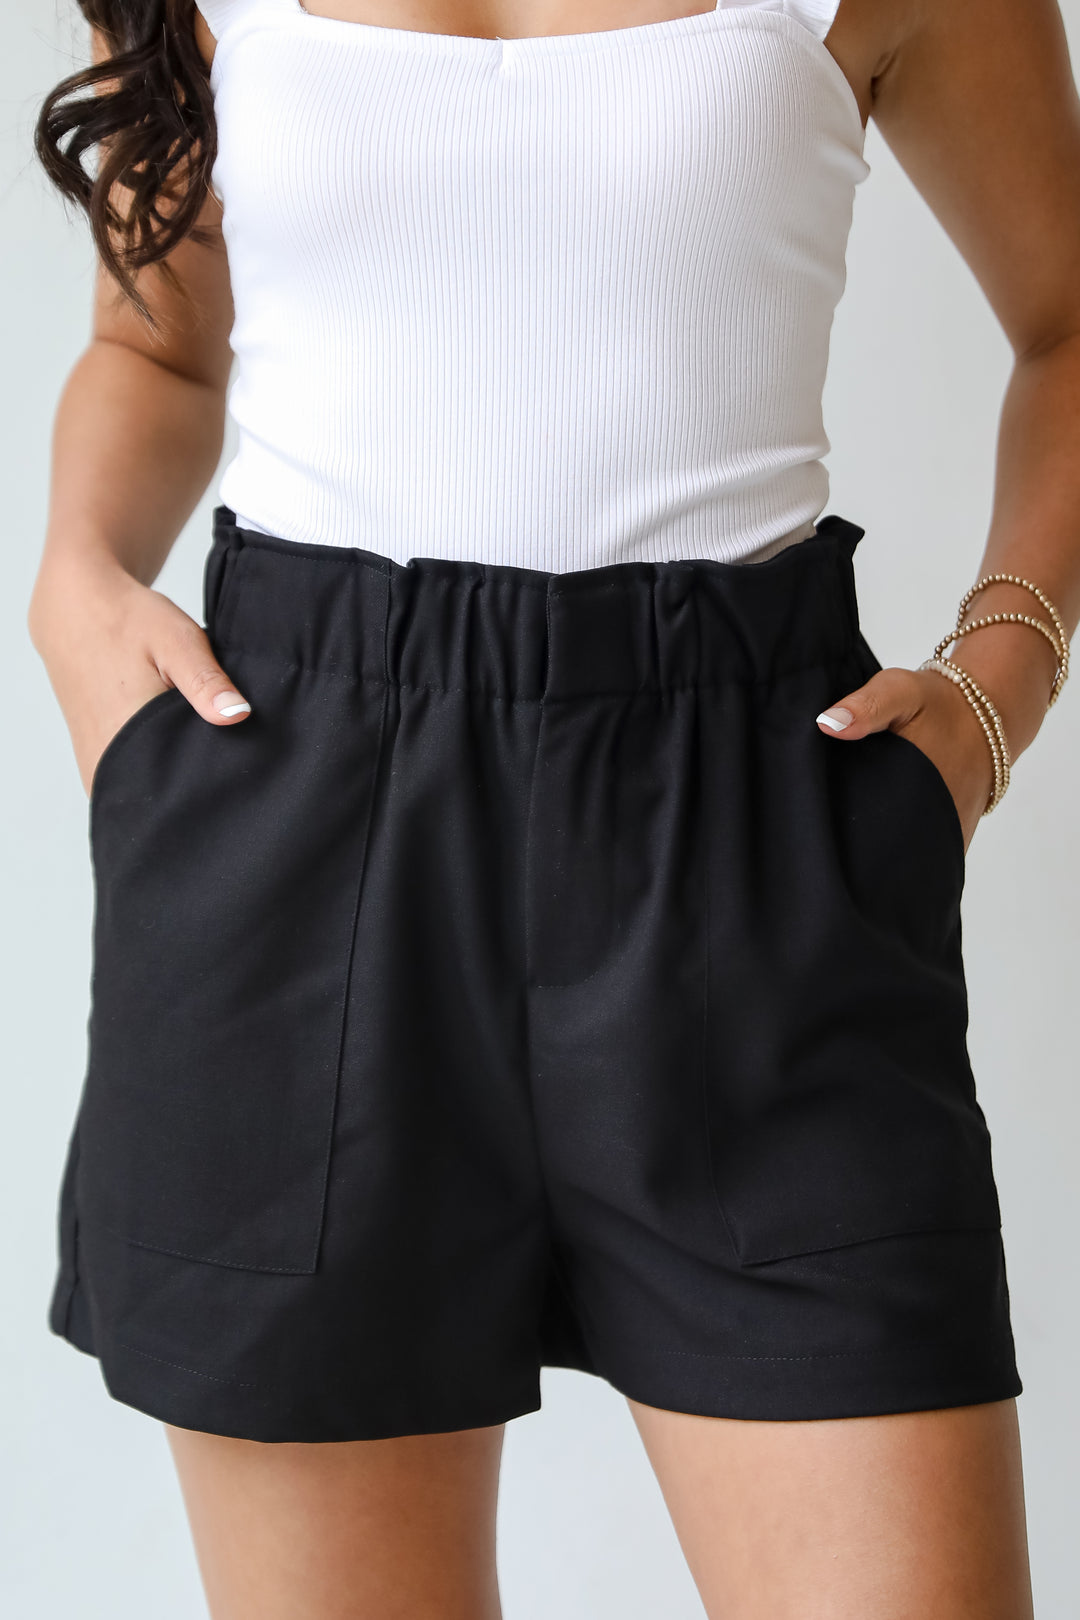 Truly Refined Black Shorts